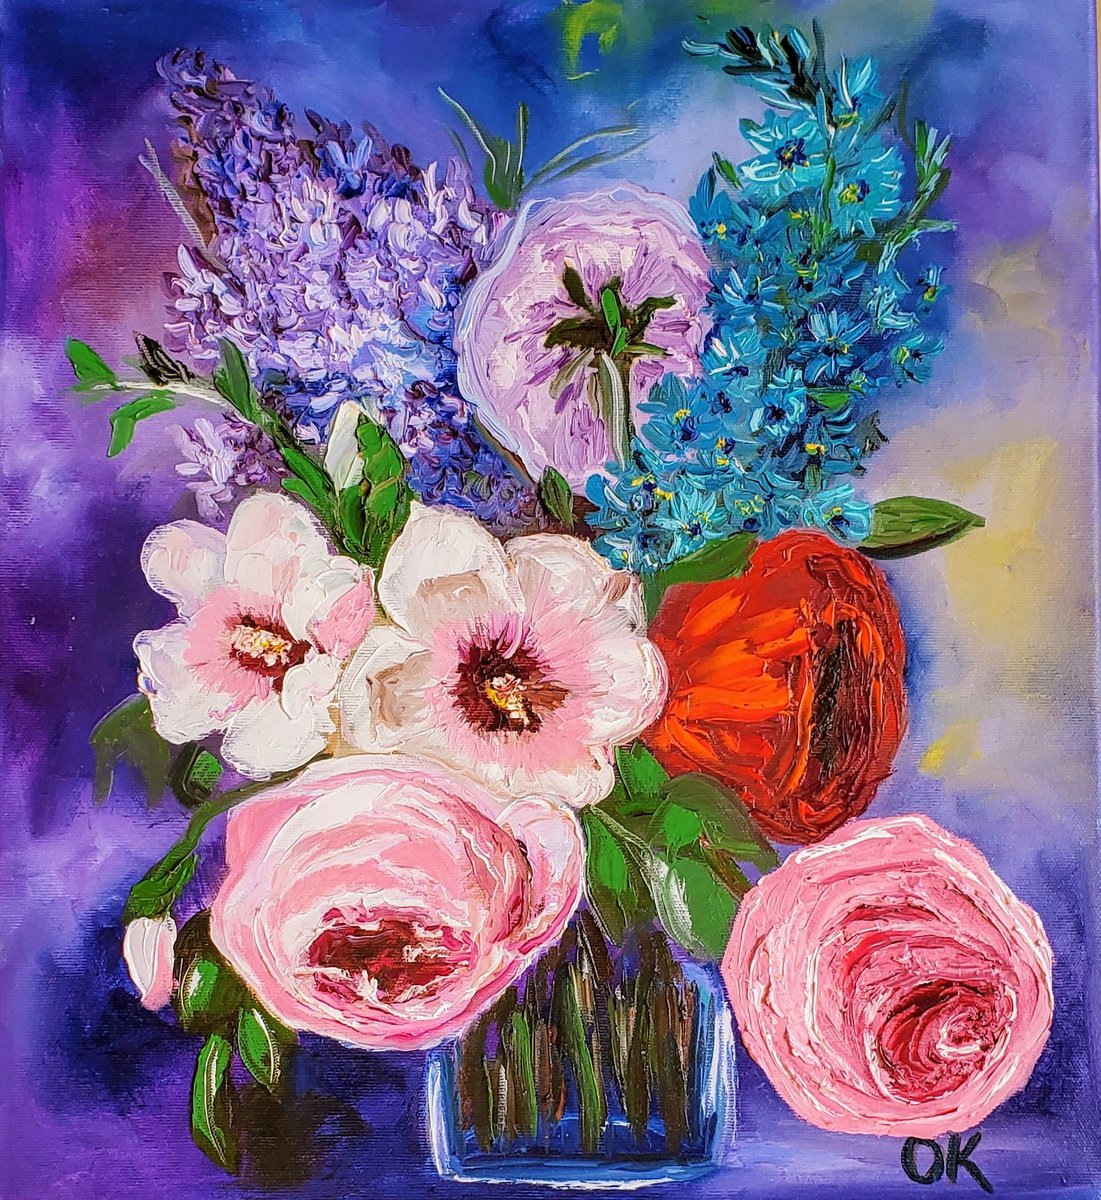 BOUQUET OF SUMMER FLOWERS pink rose white hibiscus, red poppy, urple lilac , delphinium mo... by Olga Koval